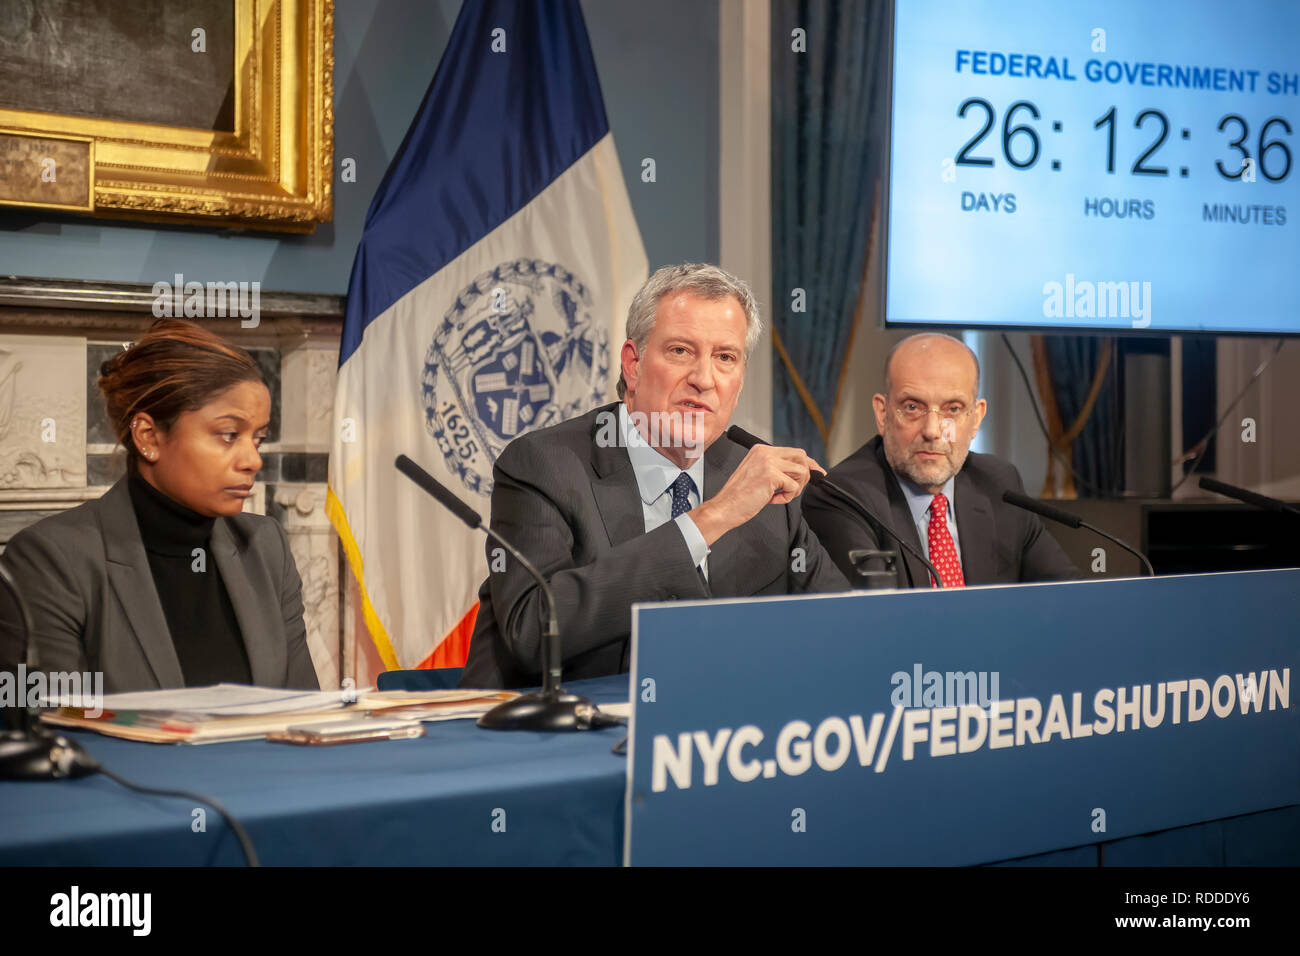 New York, USA. 17th Jan 2019. New York Mayor Bill de Blasio, center,  with Steven A. Banks, New York City Human Resources Administration/Department of Social Services, right, and Budget Director Melanie Hartzog, left, at a press conference in the Blue Room in New York City Hall on Thursday, January 17, 2019 on the effects of the government shutdown on funding of services in New York. As the shutdown progresses funding for Section 8 vouchers, SNAP benefits and an assortment of other services will cease putting New Yorkers who rely on them at risk.  Credit: Richard Levine/Alamy Live News Stock Photo